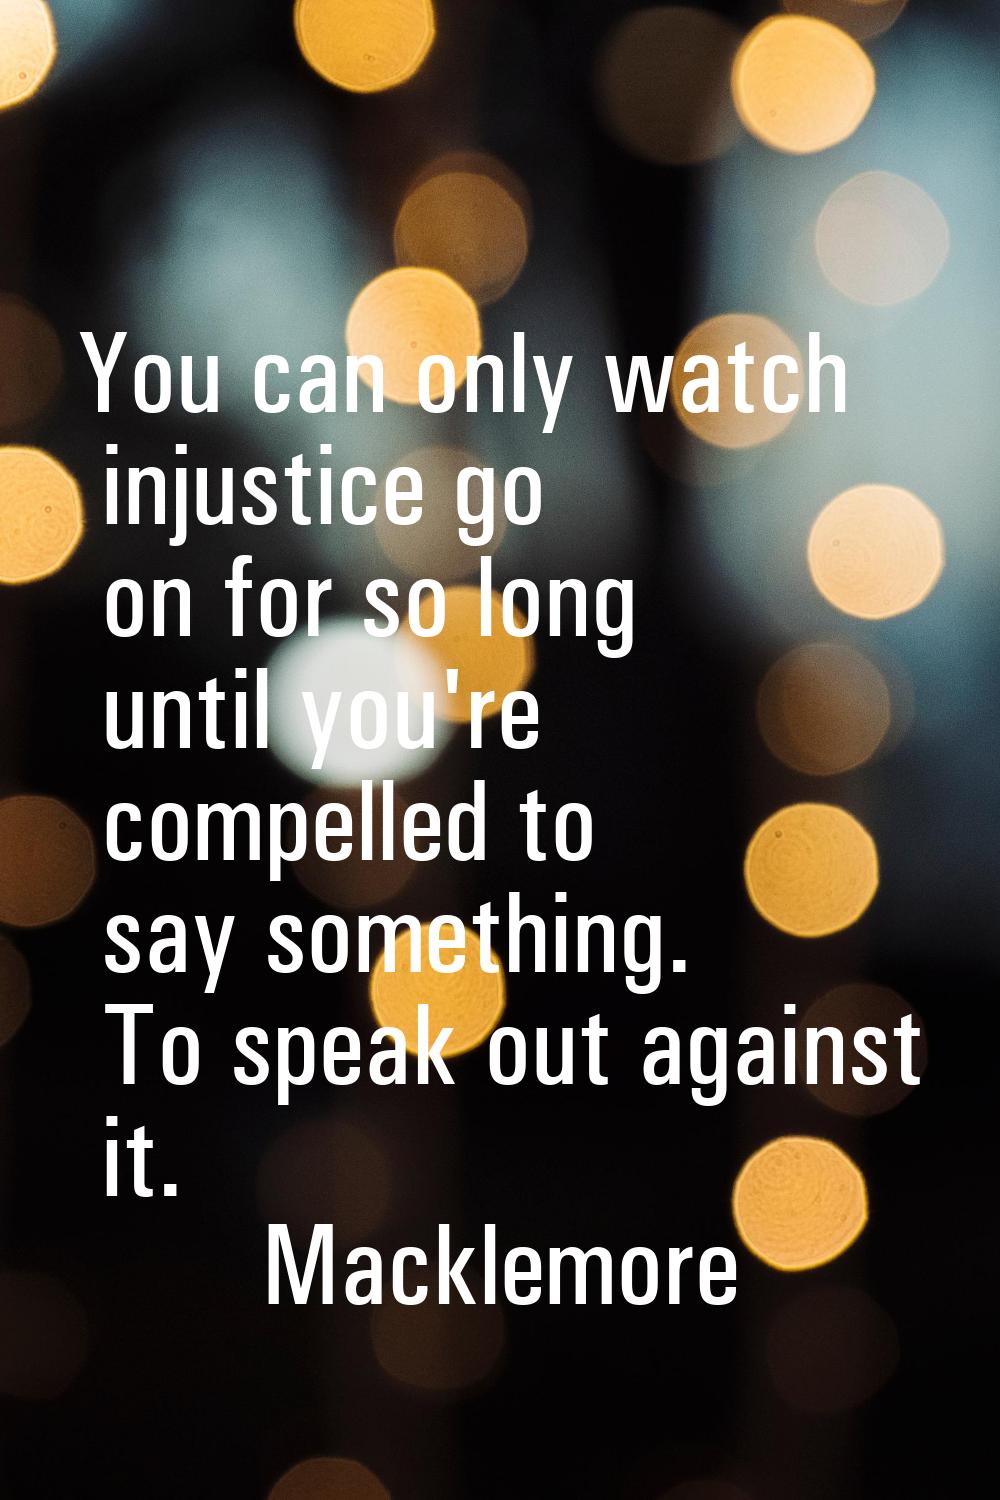 You can only watch injustice go on for so long until you're compelled to say something. To speak ou